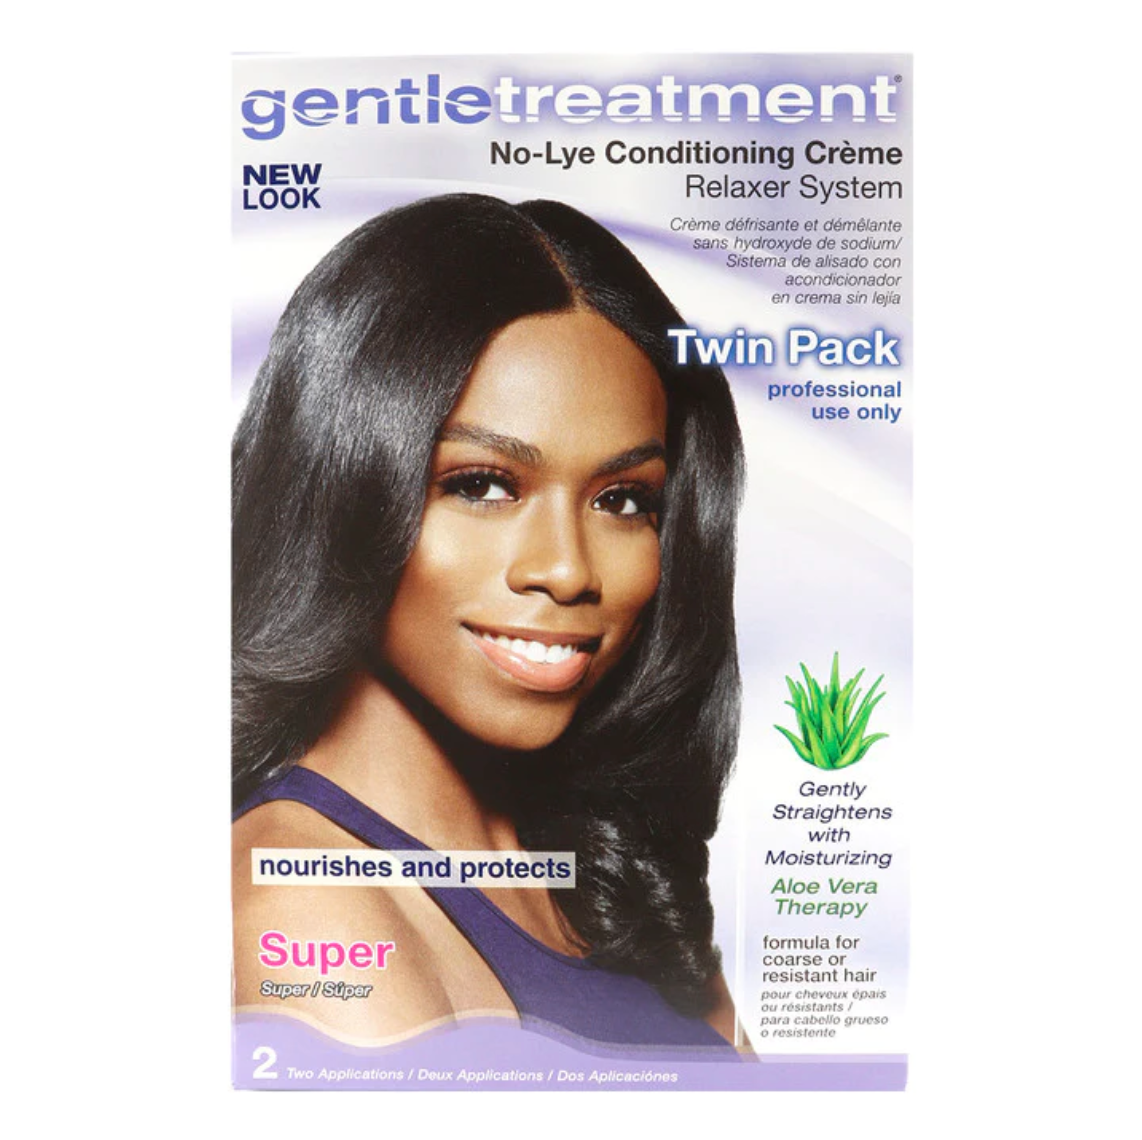 GENTLE TREATMENT No-Lye Conditioning Creme  Relaxer Kit - SUPER